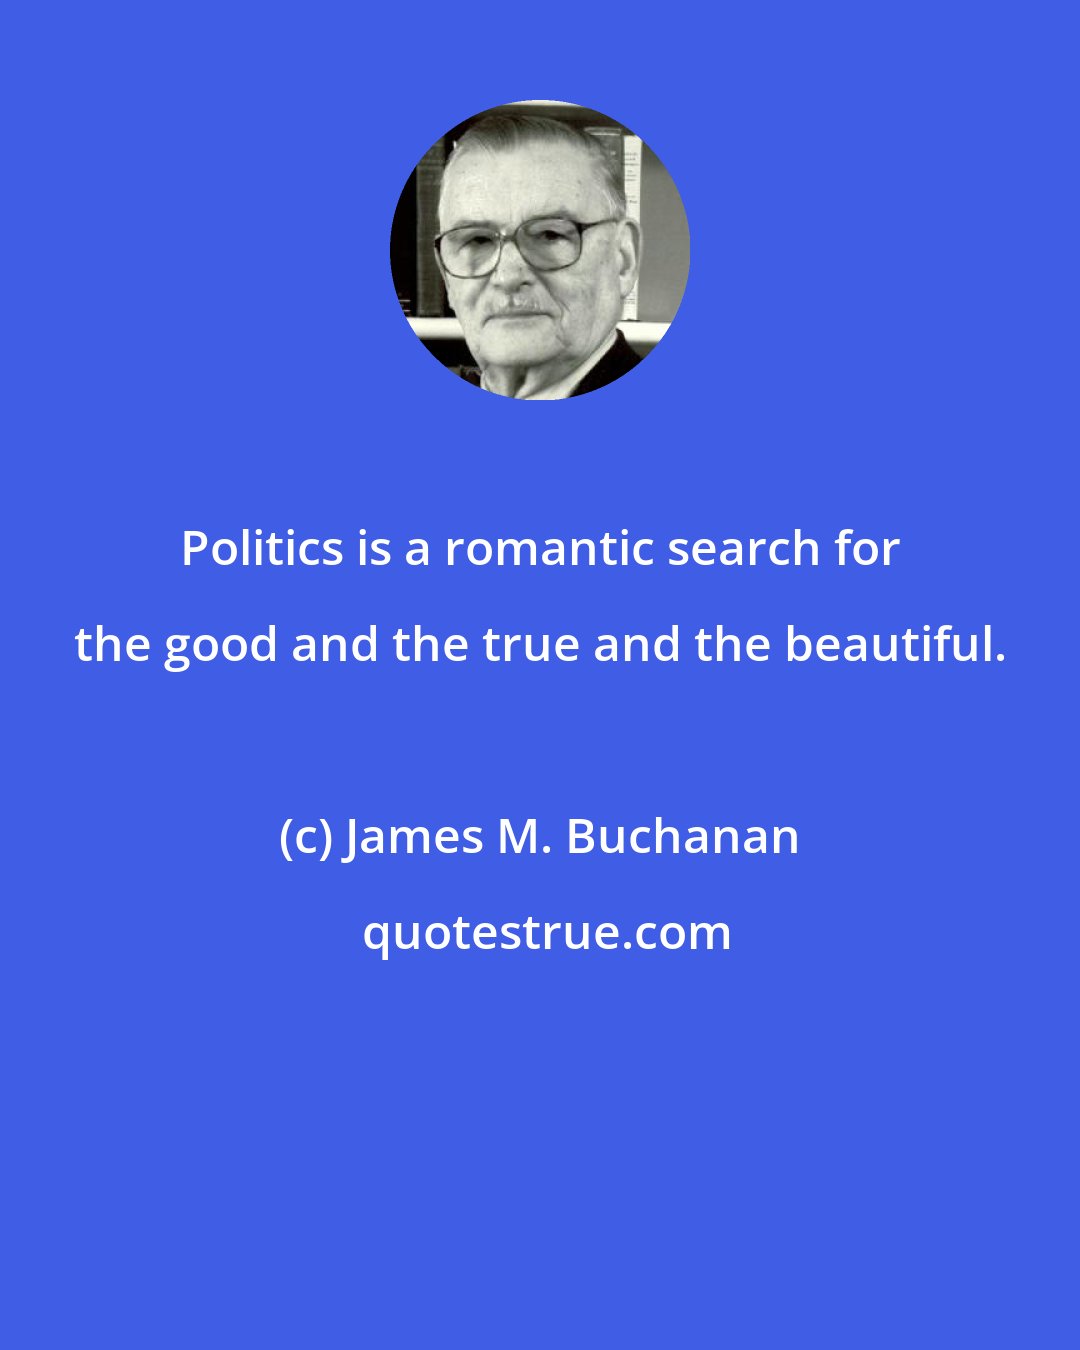 James M. Buchanan: Politics is a romantic search for the good and the true and the beautiful.